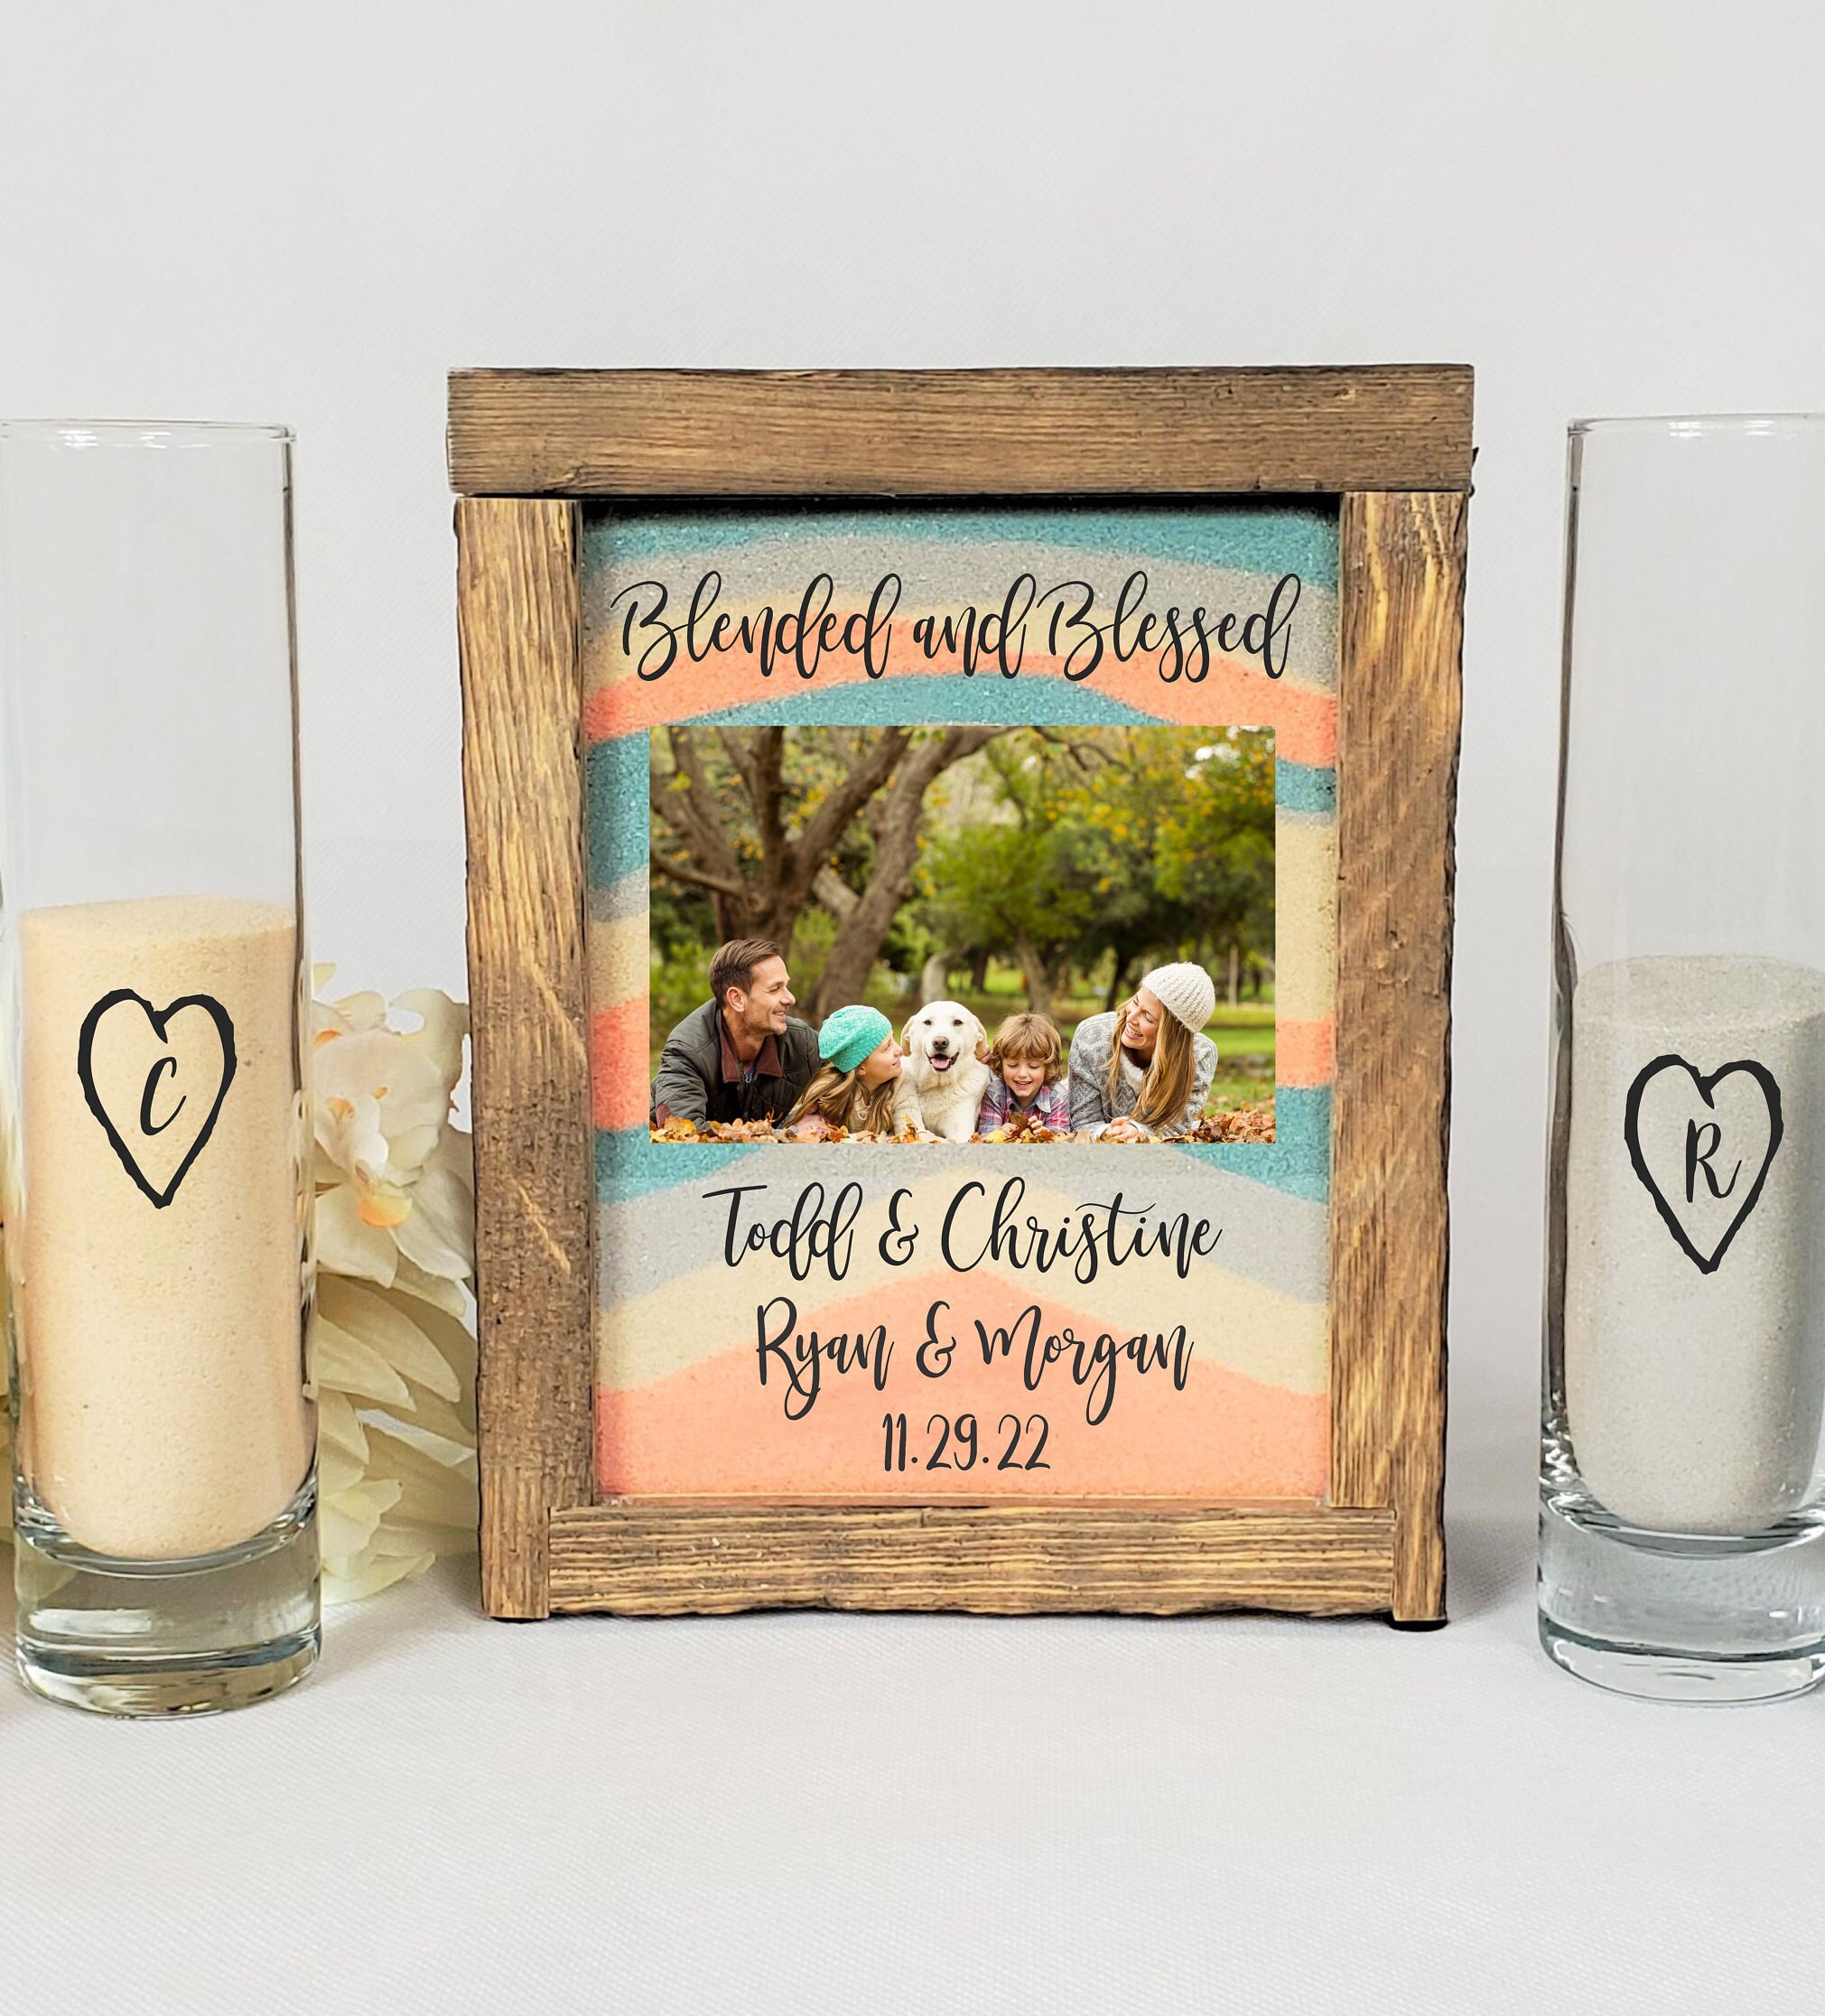 Sand Ceremony Set For Blended Family With Photo, Rustic Wedding Shadow Box Frame, Unity Candle Alternative, Beach Or Outdoor Decor